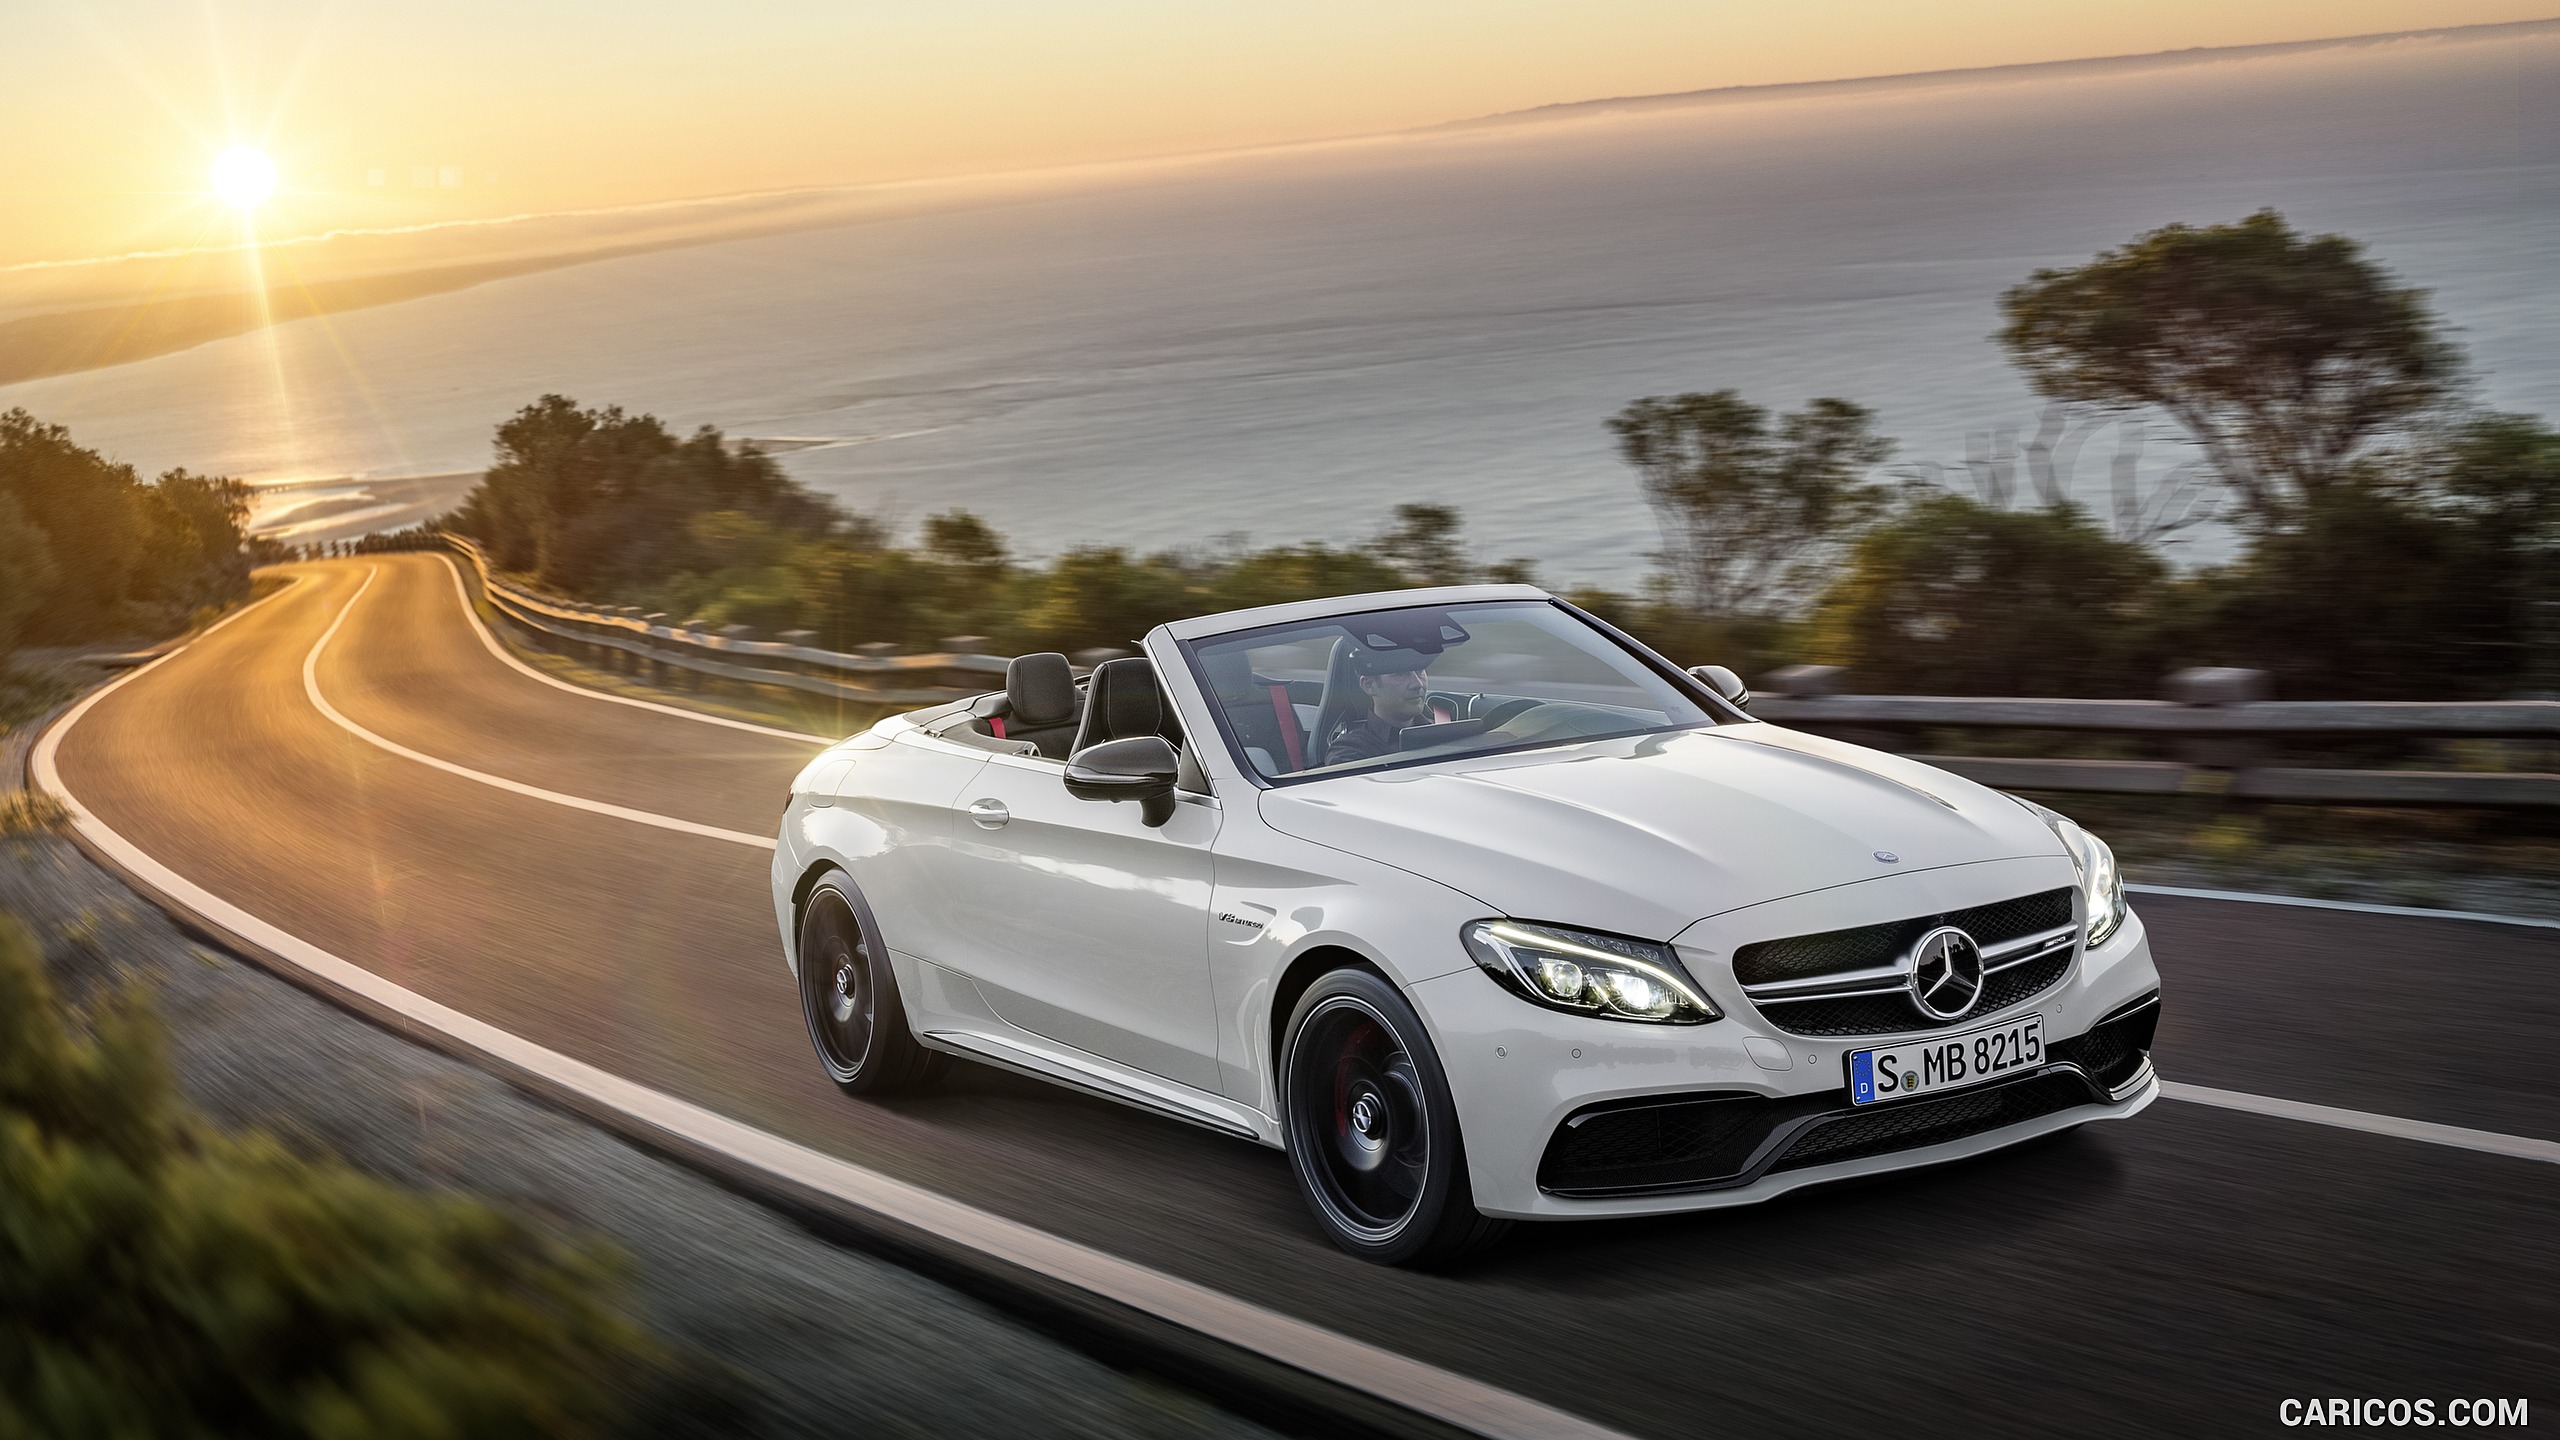 2017 Mercedes-AMG C63 S Cabriolet (Chassis: A205, Color: Designo Diamond White Bright) - Front, #3 of 222